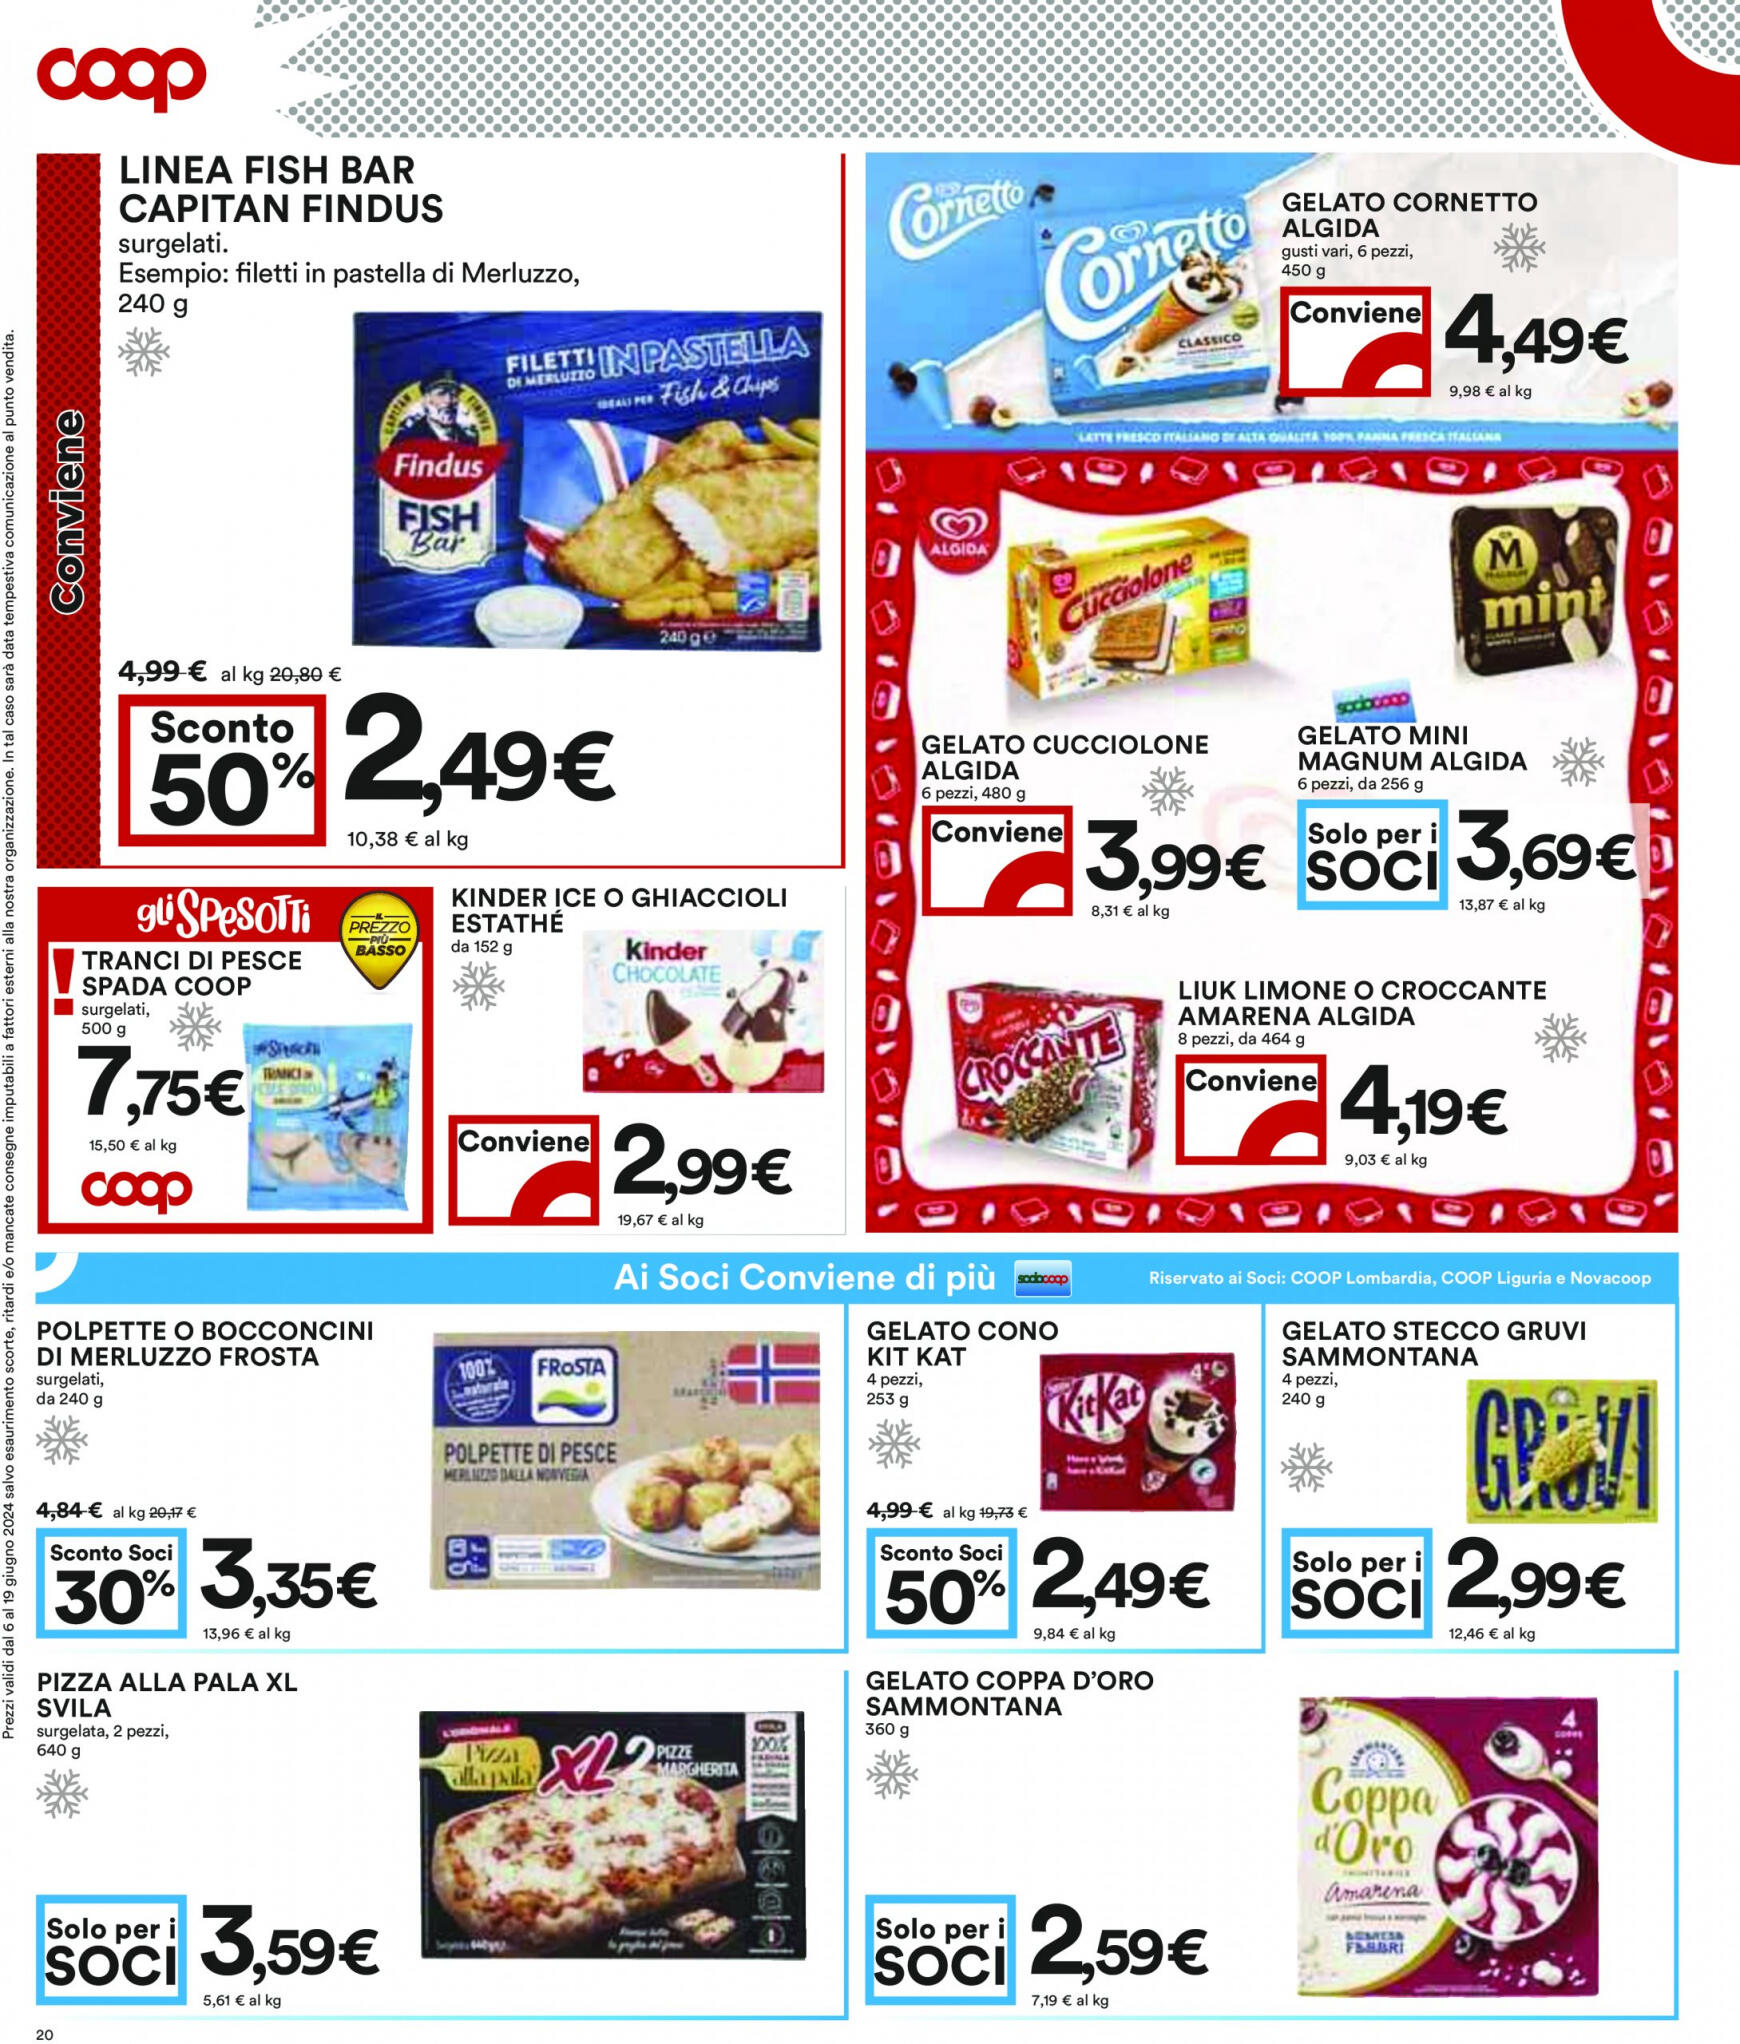 coop - Nuovo volantino Coop 10.06. - 19.06. - page: 20